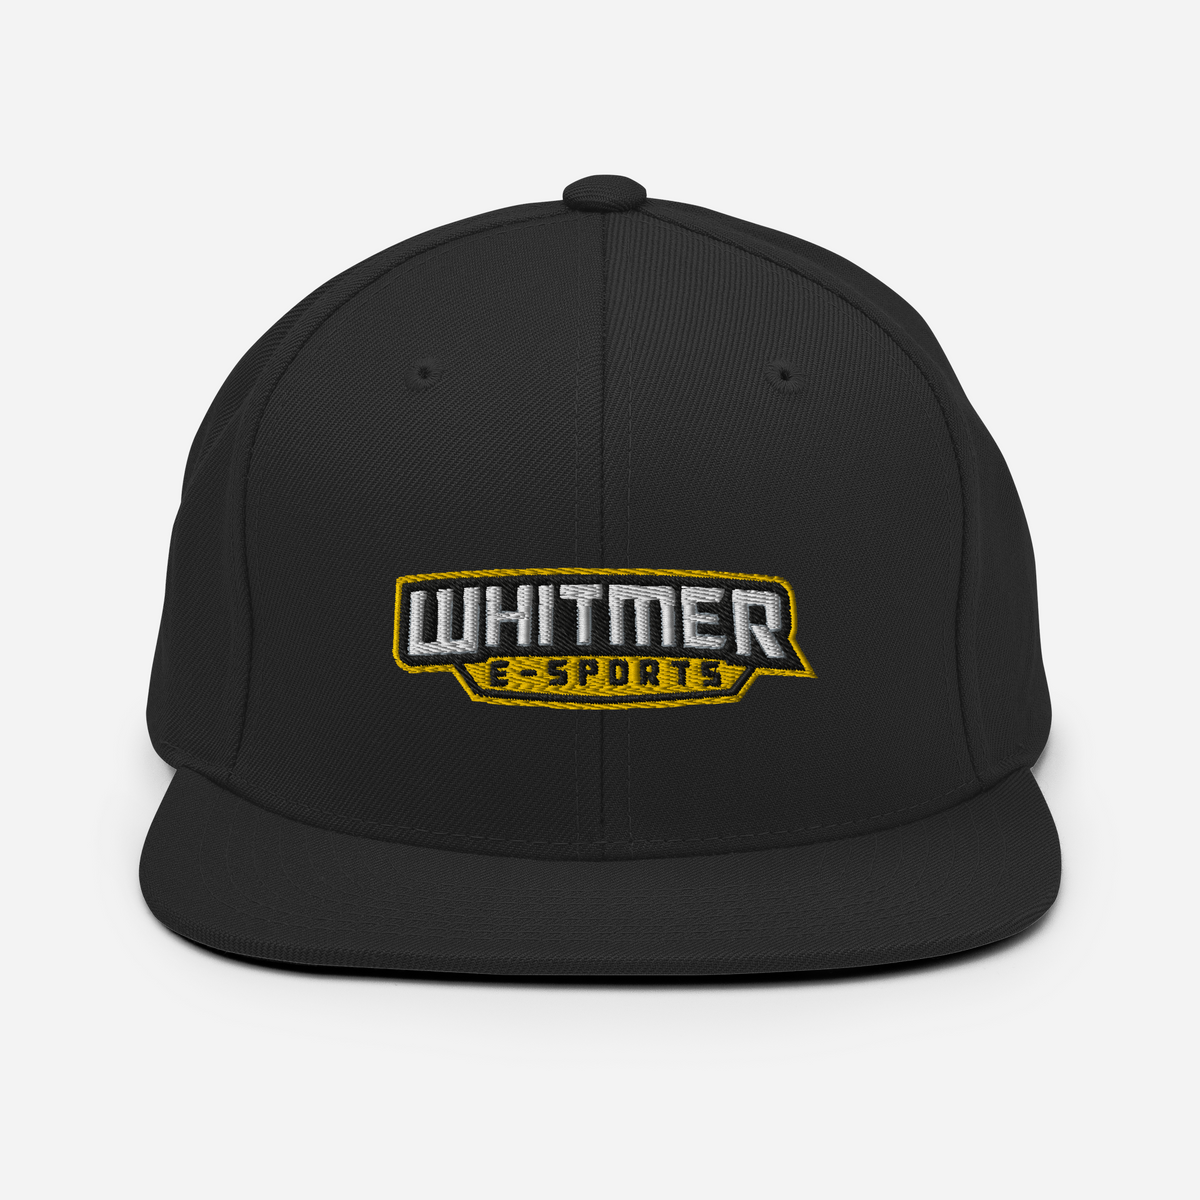 Whitmer High School | On Demand | Embroidered Snapback Hat